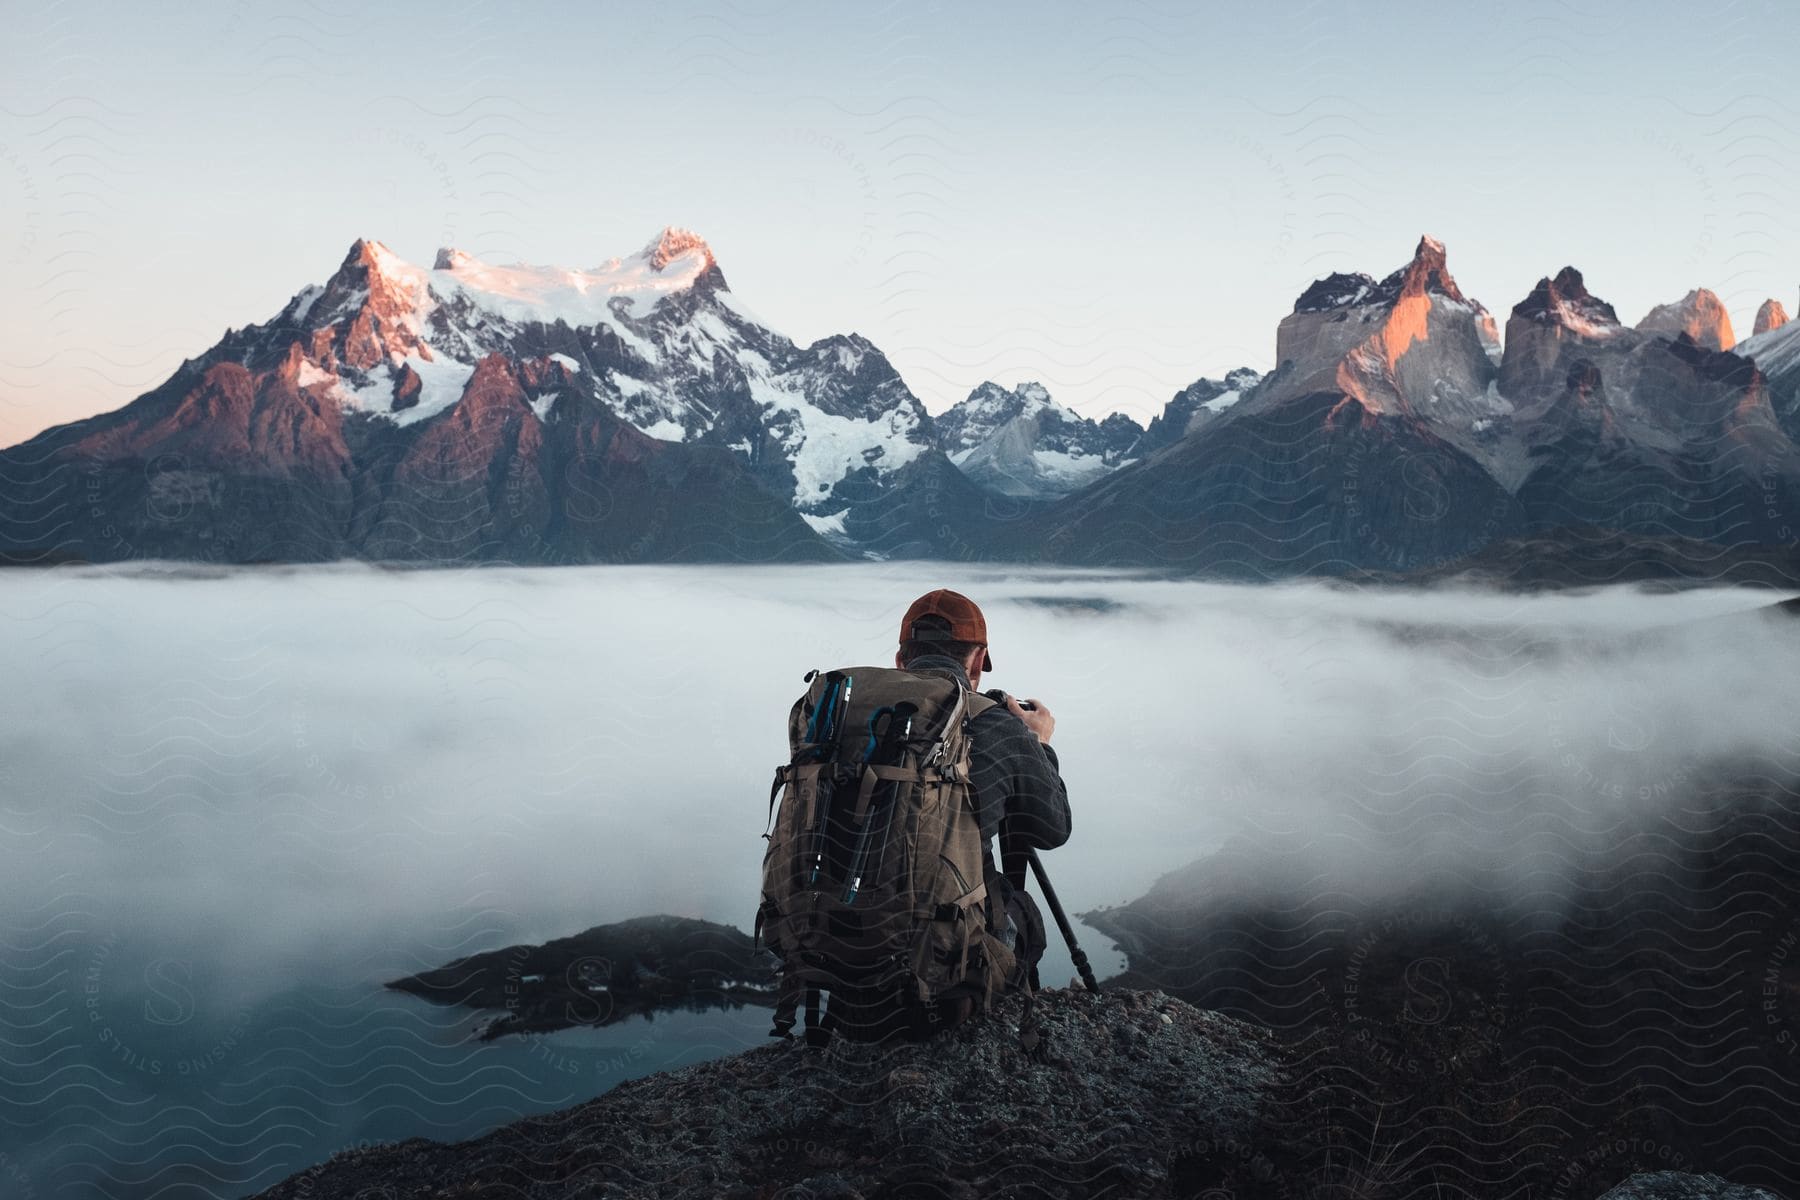 A person with a backpack trekking through a mountainous landscape with water in the background